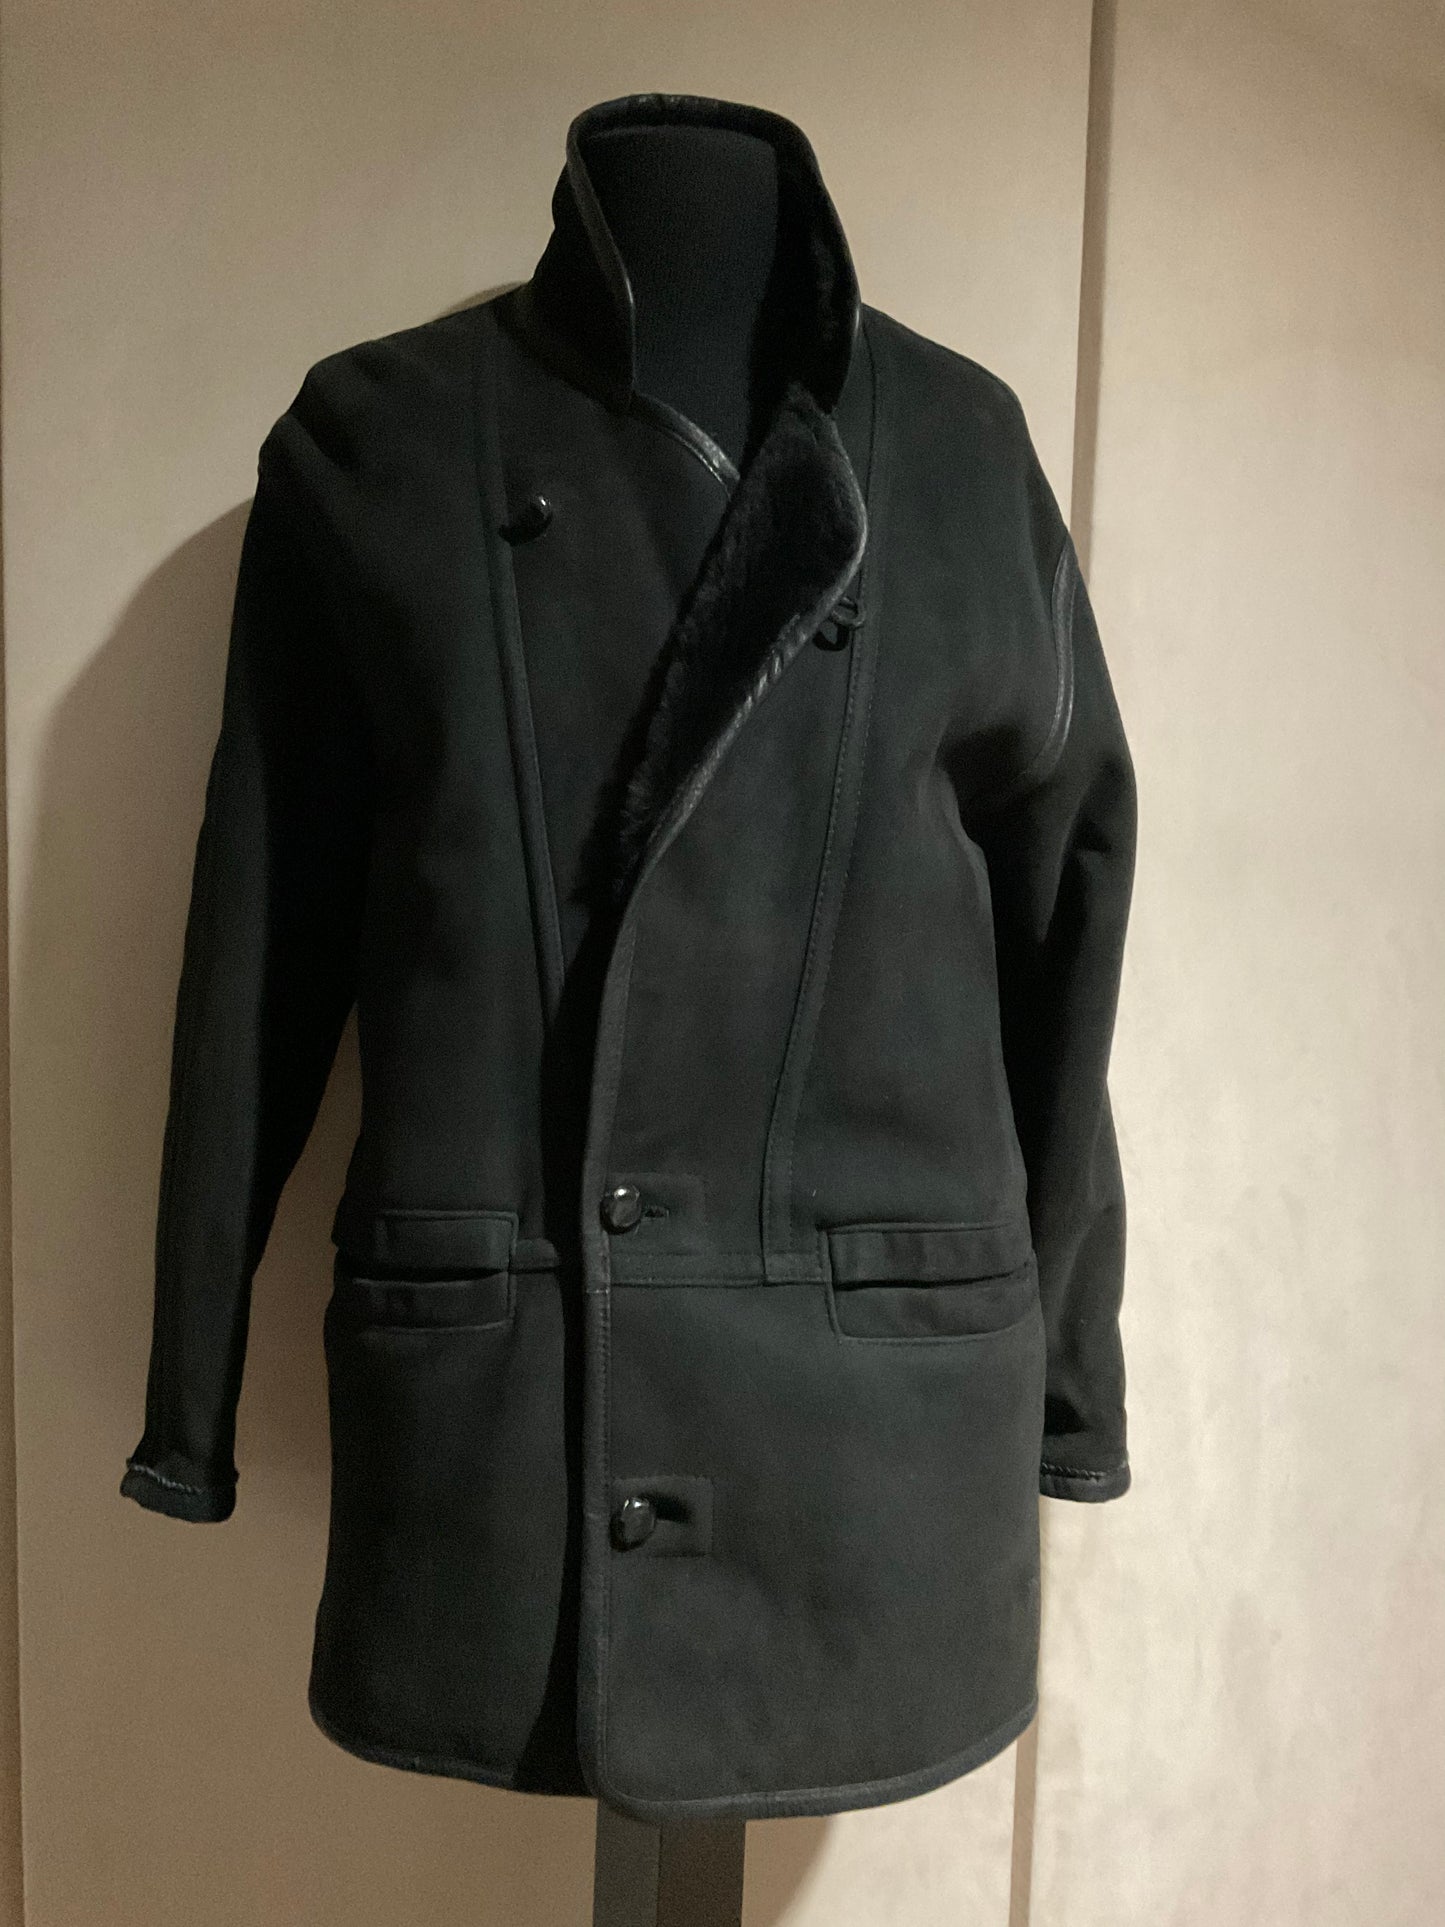 R P COAT / SHEARLING / BLACK / MID LENGHT / NEW / MEDIUM / MADE IN ITALY